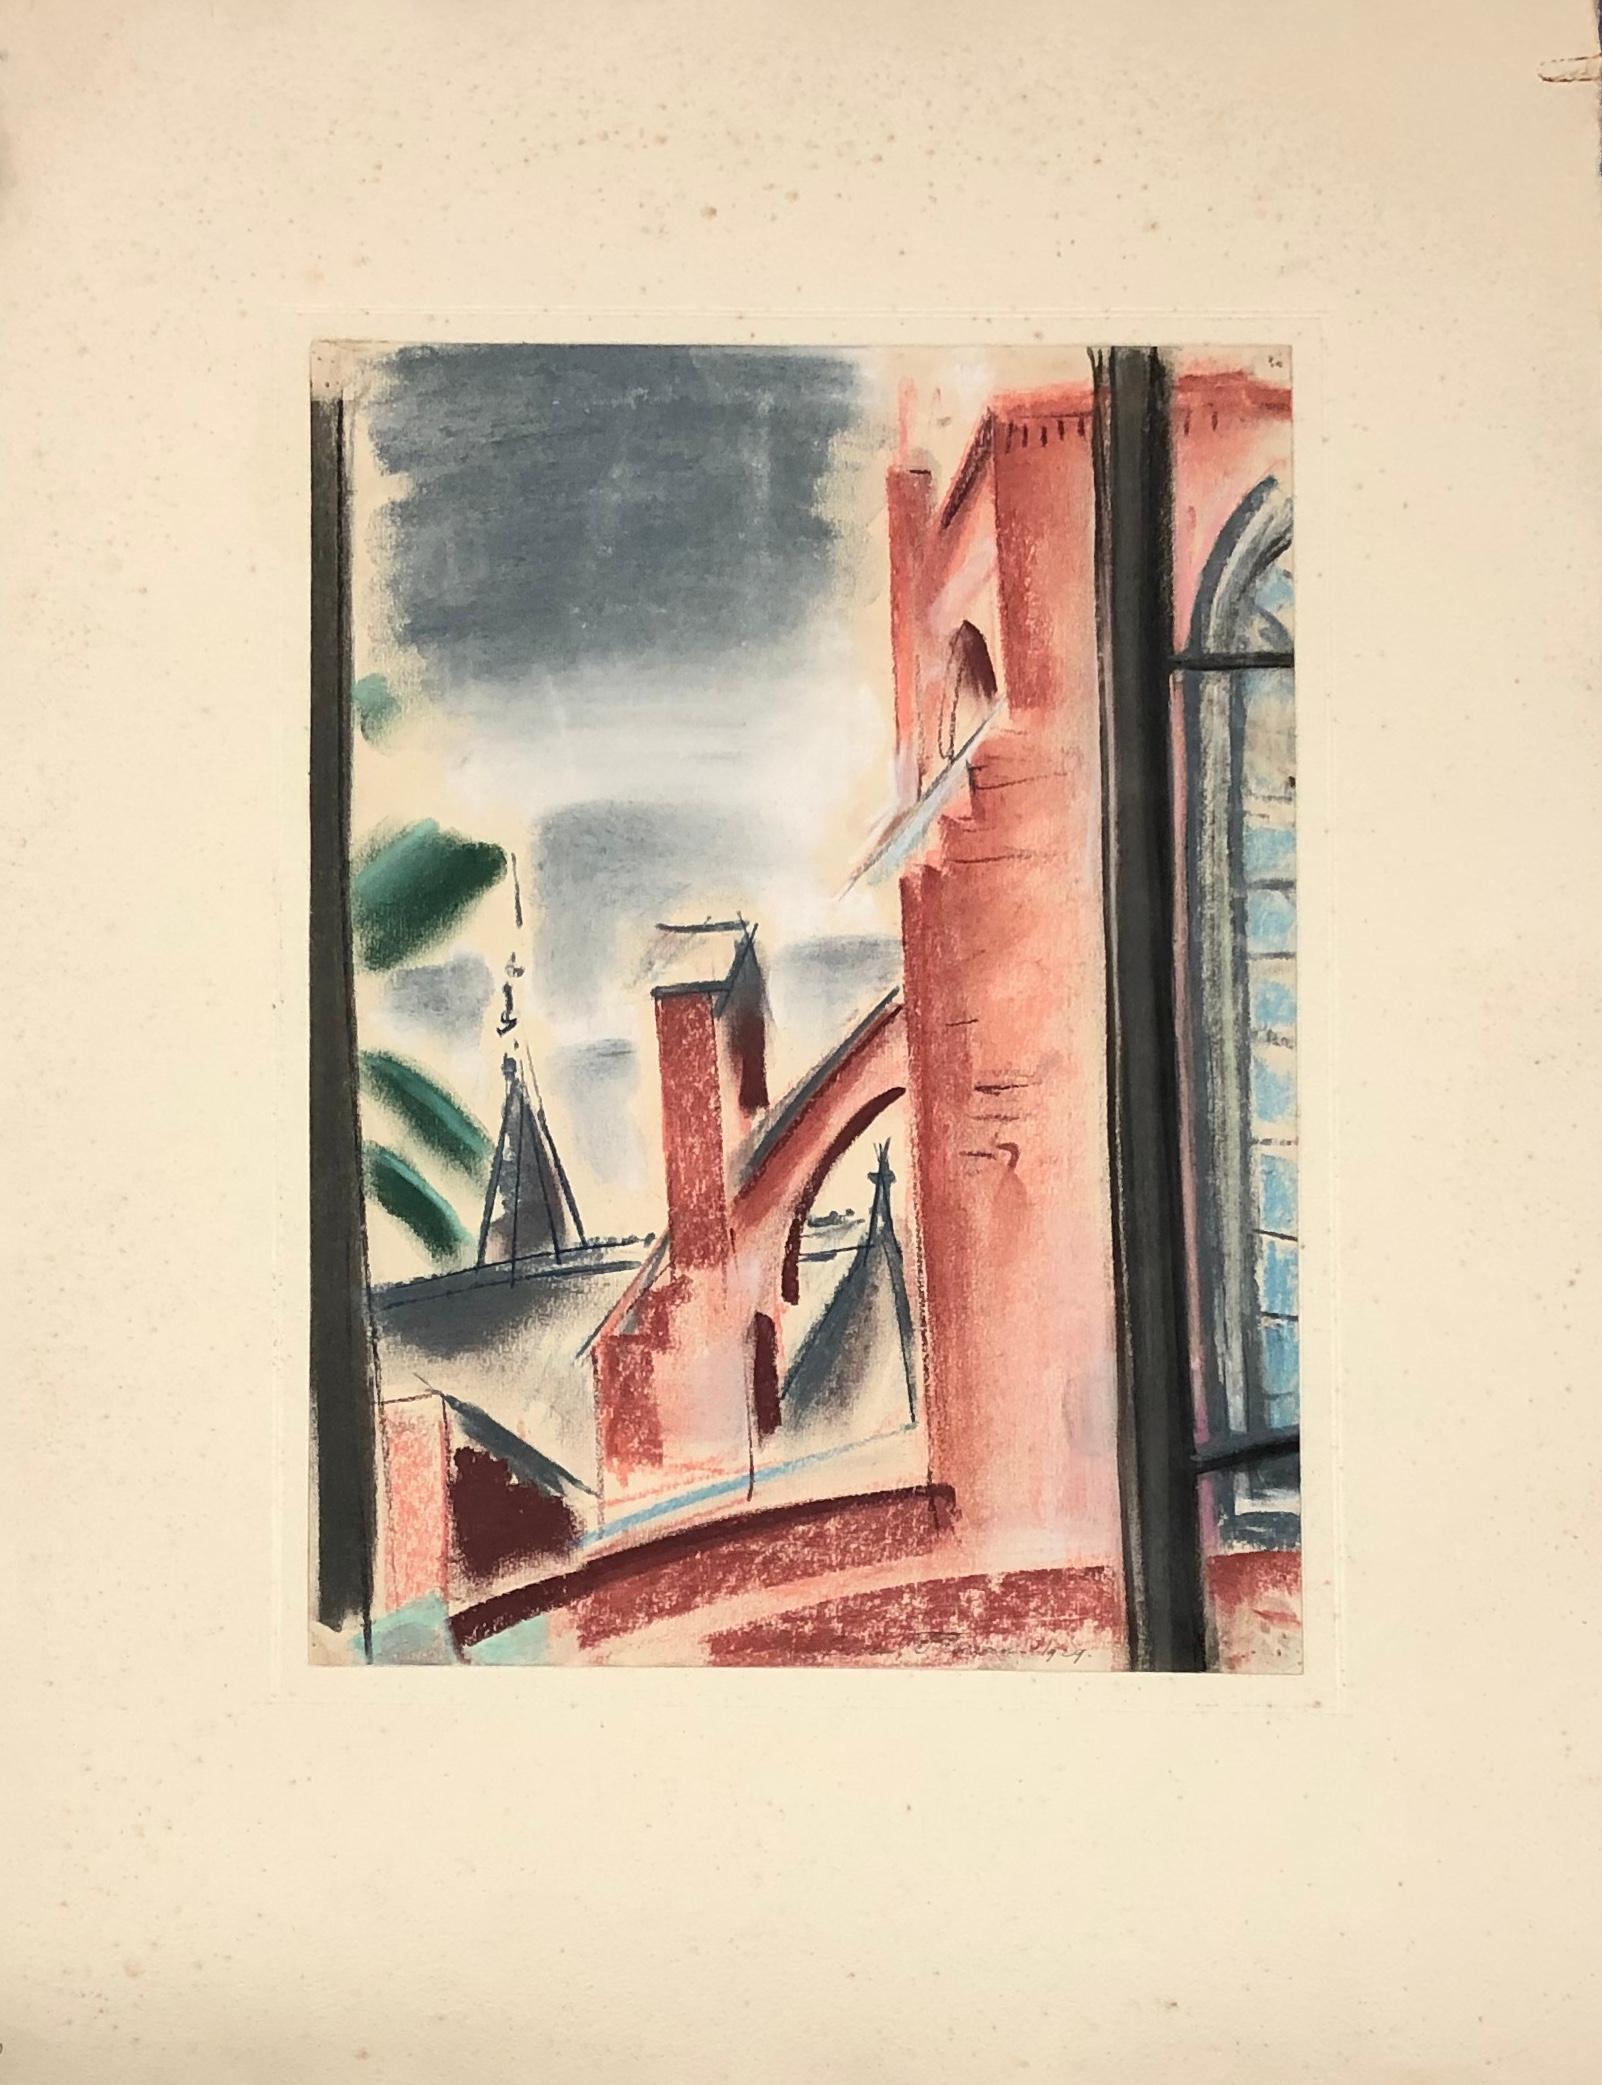 CLAES-THOBOIS Albert. Roof view. Pastel. Signed and dated 1929. - Cubist Art by Albert Claes-Thobois